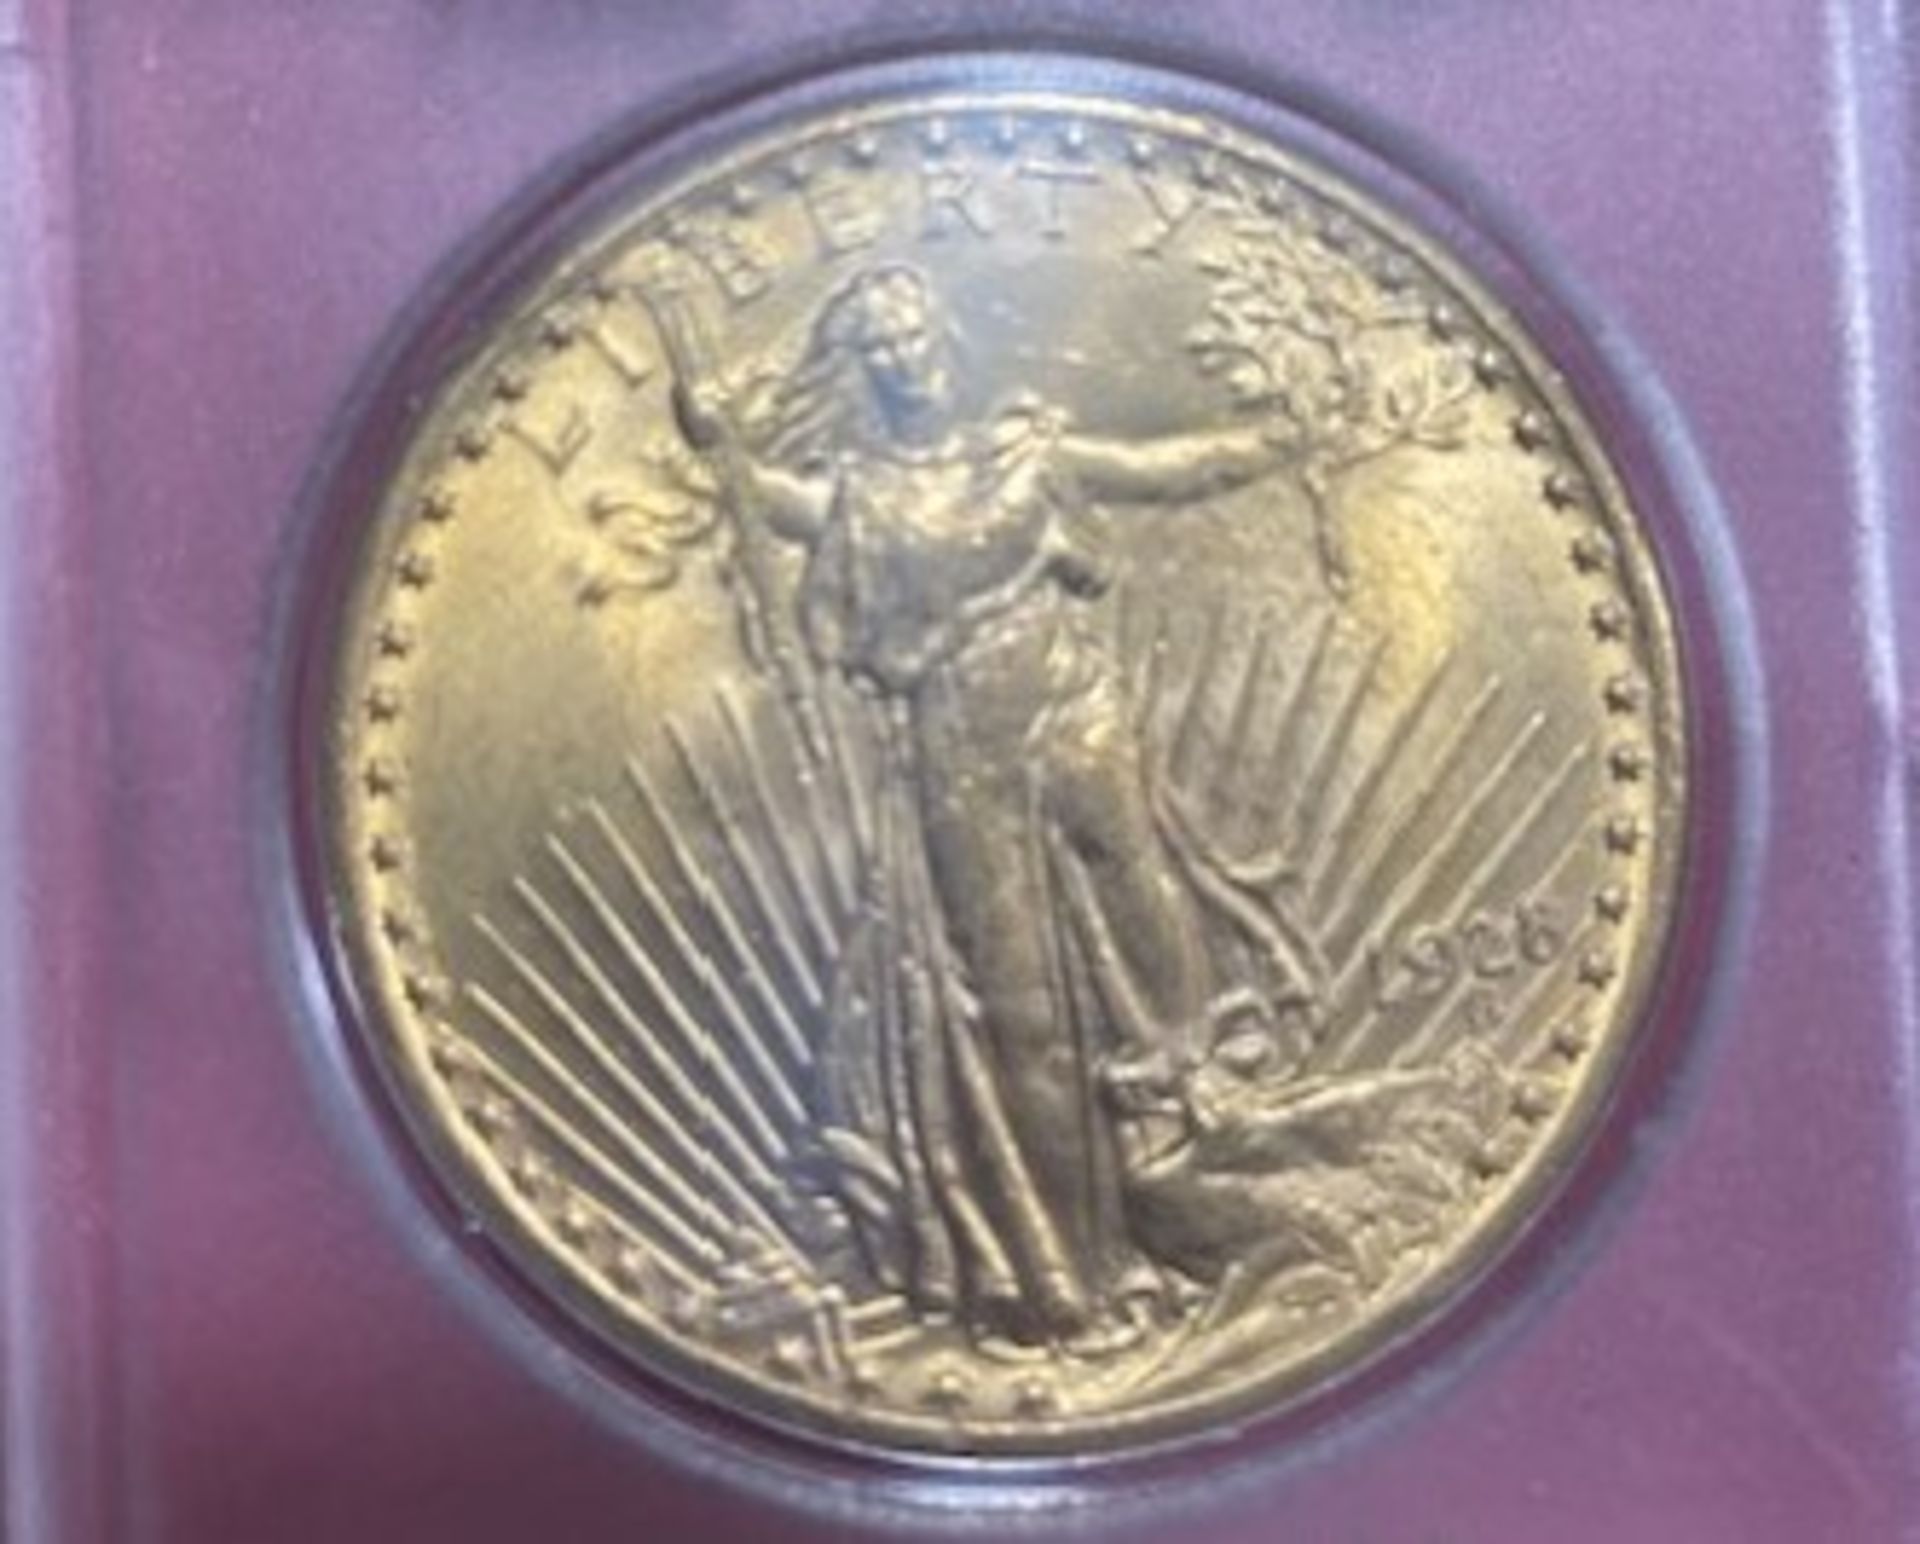 1928 St. Gaudens Double Eagle $20 Gold Coin - Image 3 of 12